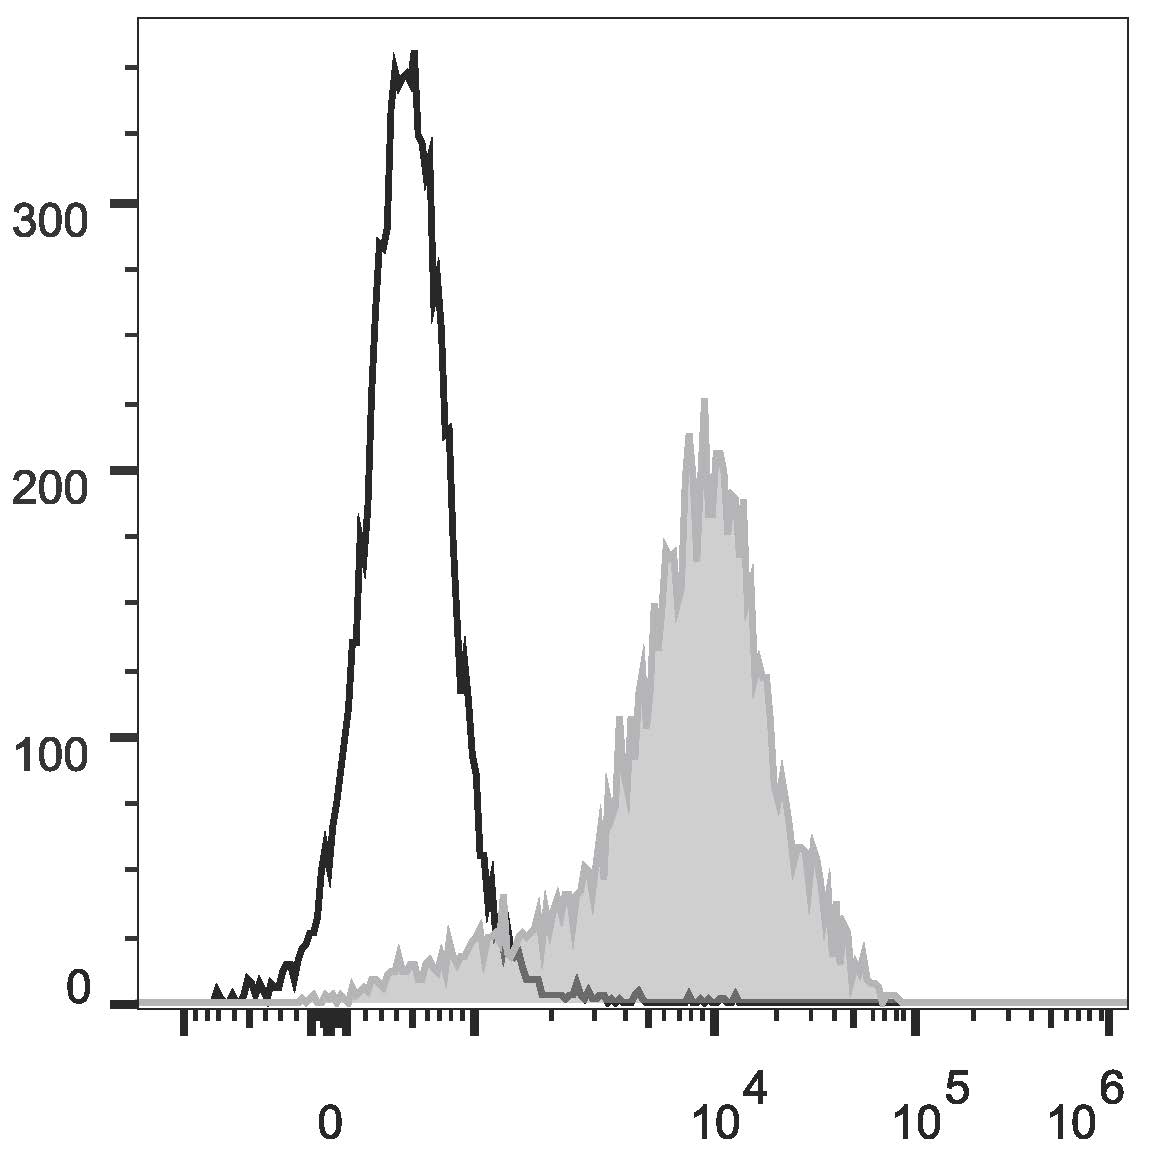 Rat splenocytes are  stained with Anti-Rat CD44H Monoclonal Antibody(FITC Conjugated)[Used at 0.2 μg/10<sup>6</sup> cells dilution](filled gray histogram). Unstained splenocytes (empty black histogram) are used as control.